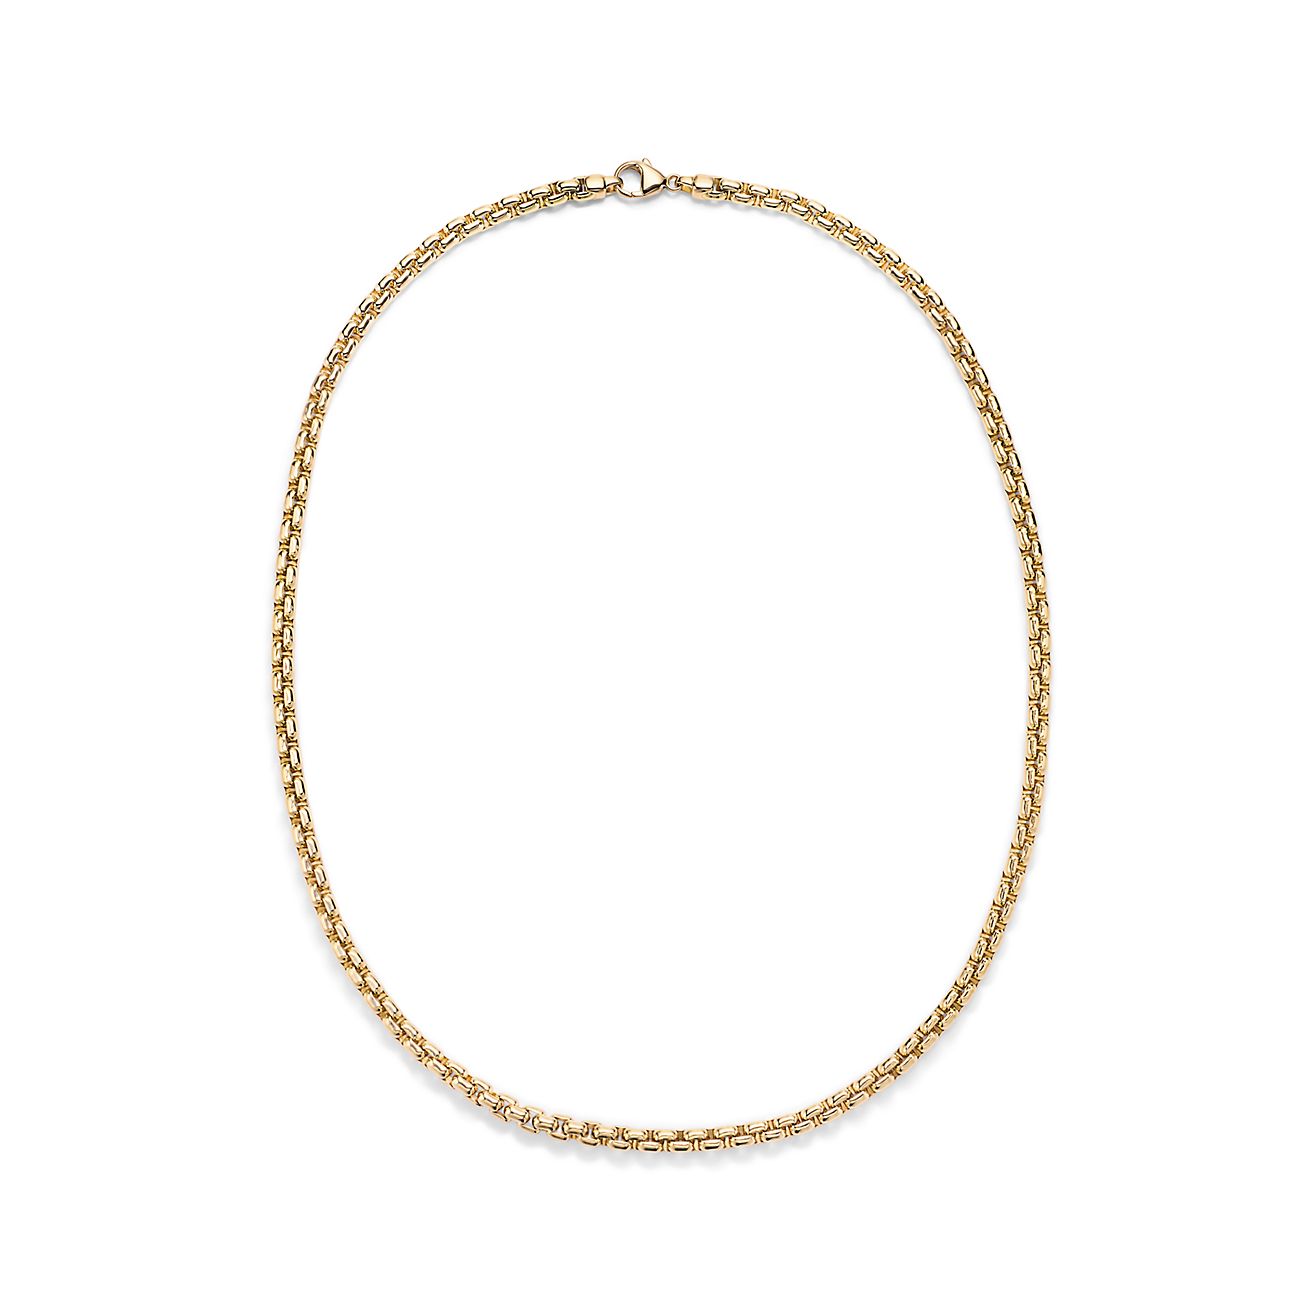 Square link necklace in 18k gold 